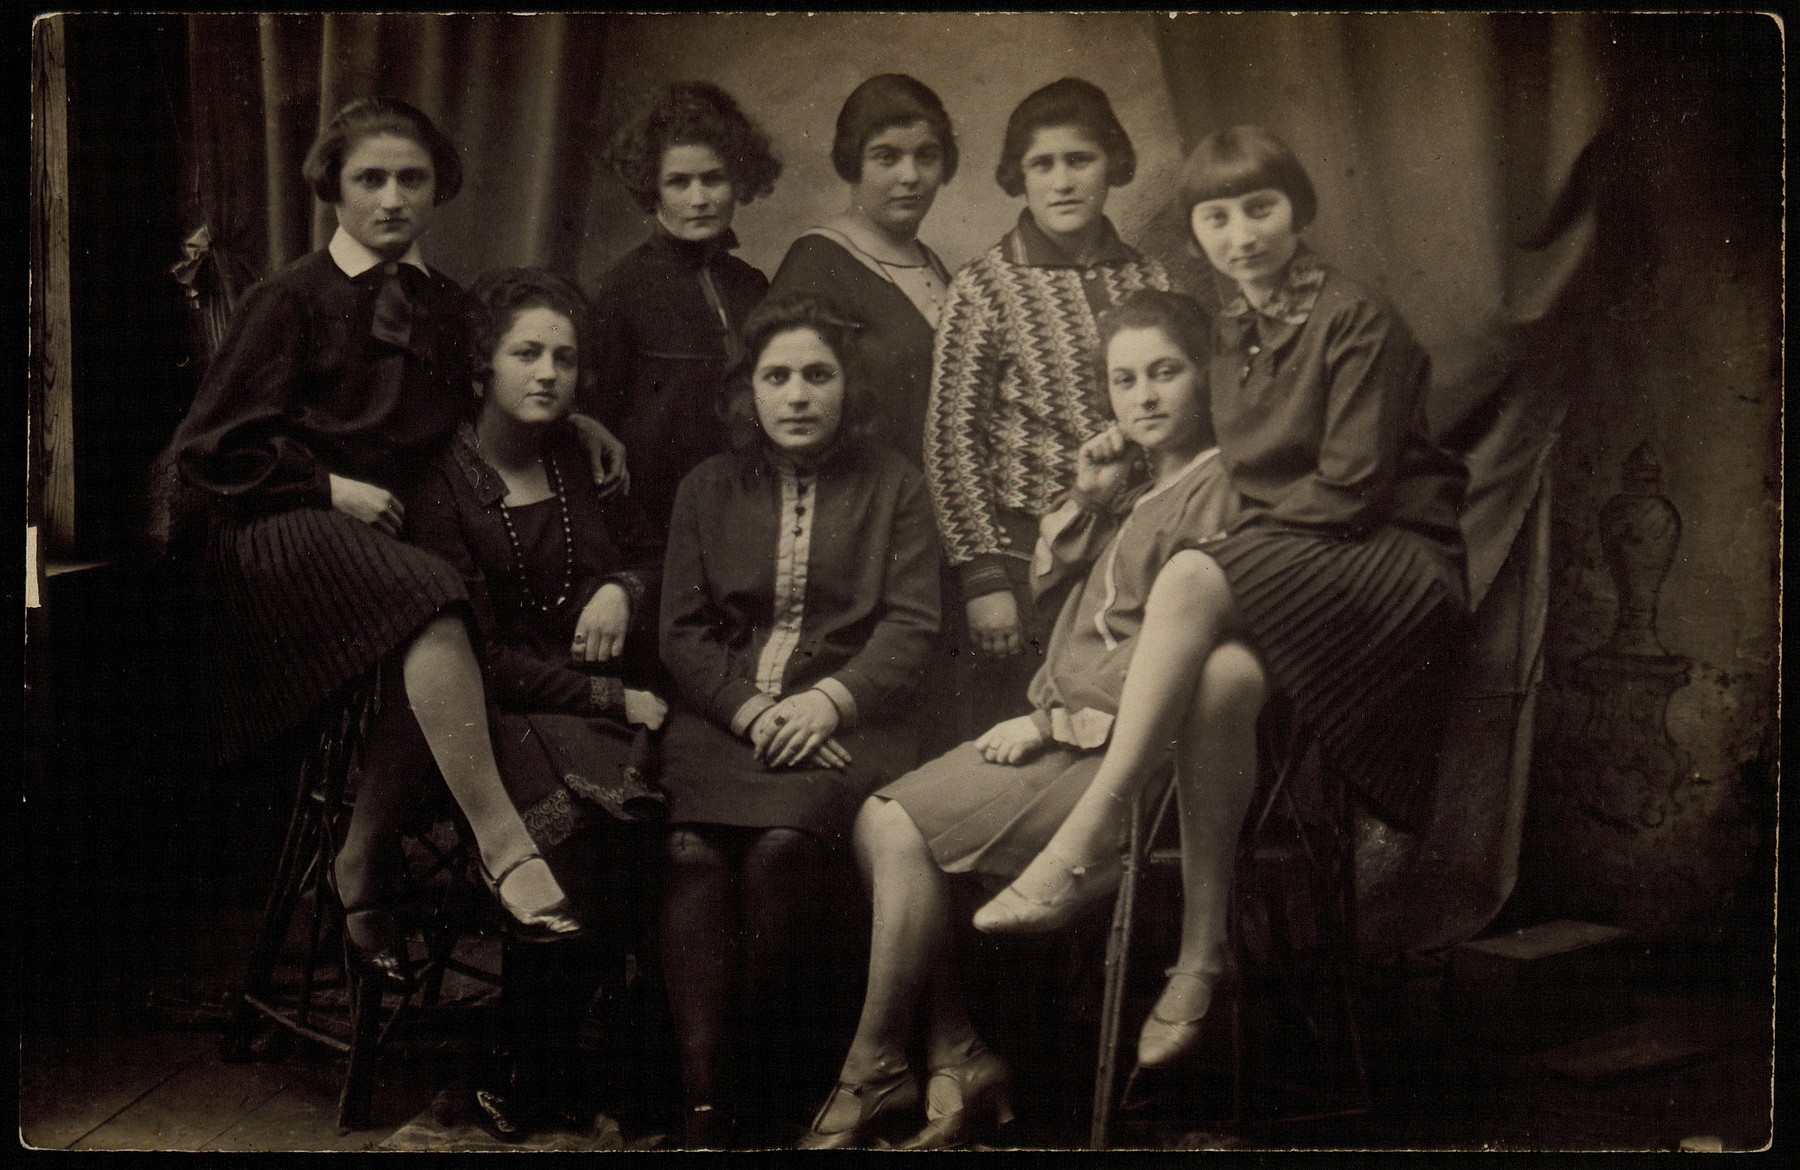 Group portrait of young Jewish women who were members of the "Club 21" in Eisiskes.

Among those pictured are Zipporah Katz (seated on the right), Kumin (second from the right), Etele Yuranski (fourth from the right), Geneshe Kaganowicz (far left) and Matle Sonenson (second from the left).  Zipporah, Geneshe and Matle later became sisters-in-law.  Matle survived the war in Siberia; Etele was killed in the Radun ghetto on May 10, 1942; Kumin died in Auschwitz; Zipporah was killed by members of the Polish Home Army in October 1944.  The others were killed by the Germans during the September 1941 mass shooting action in Eisiskes.